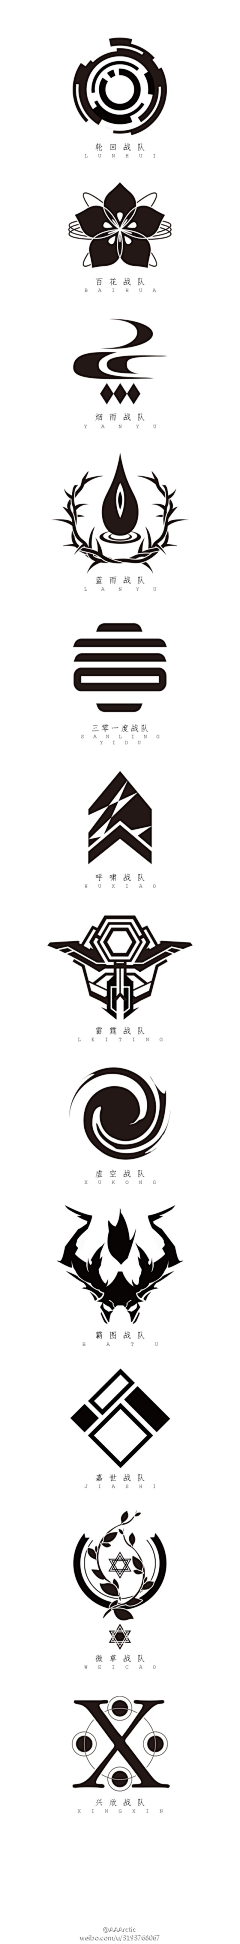 silverwing采集到▲Icon&LOGO▲